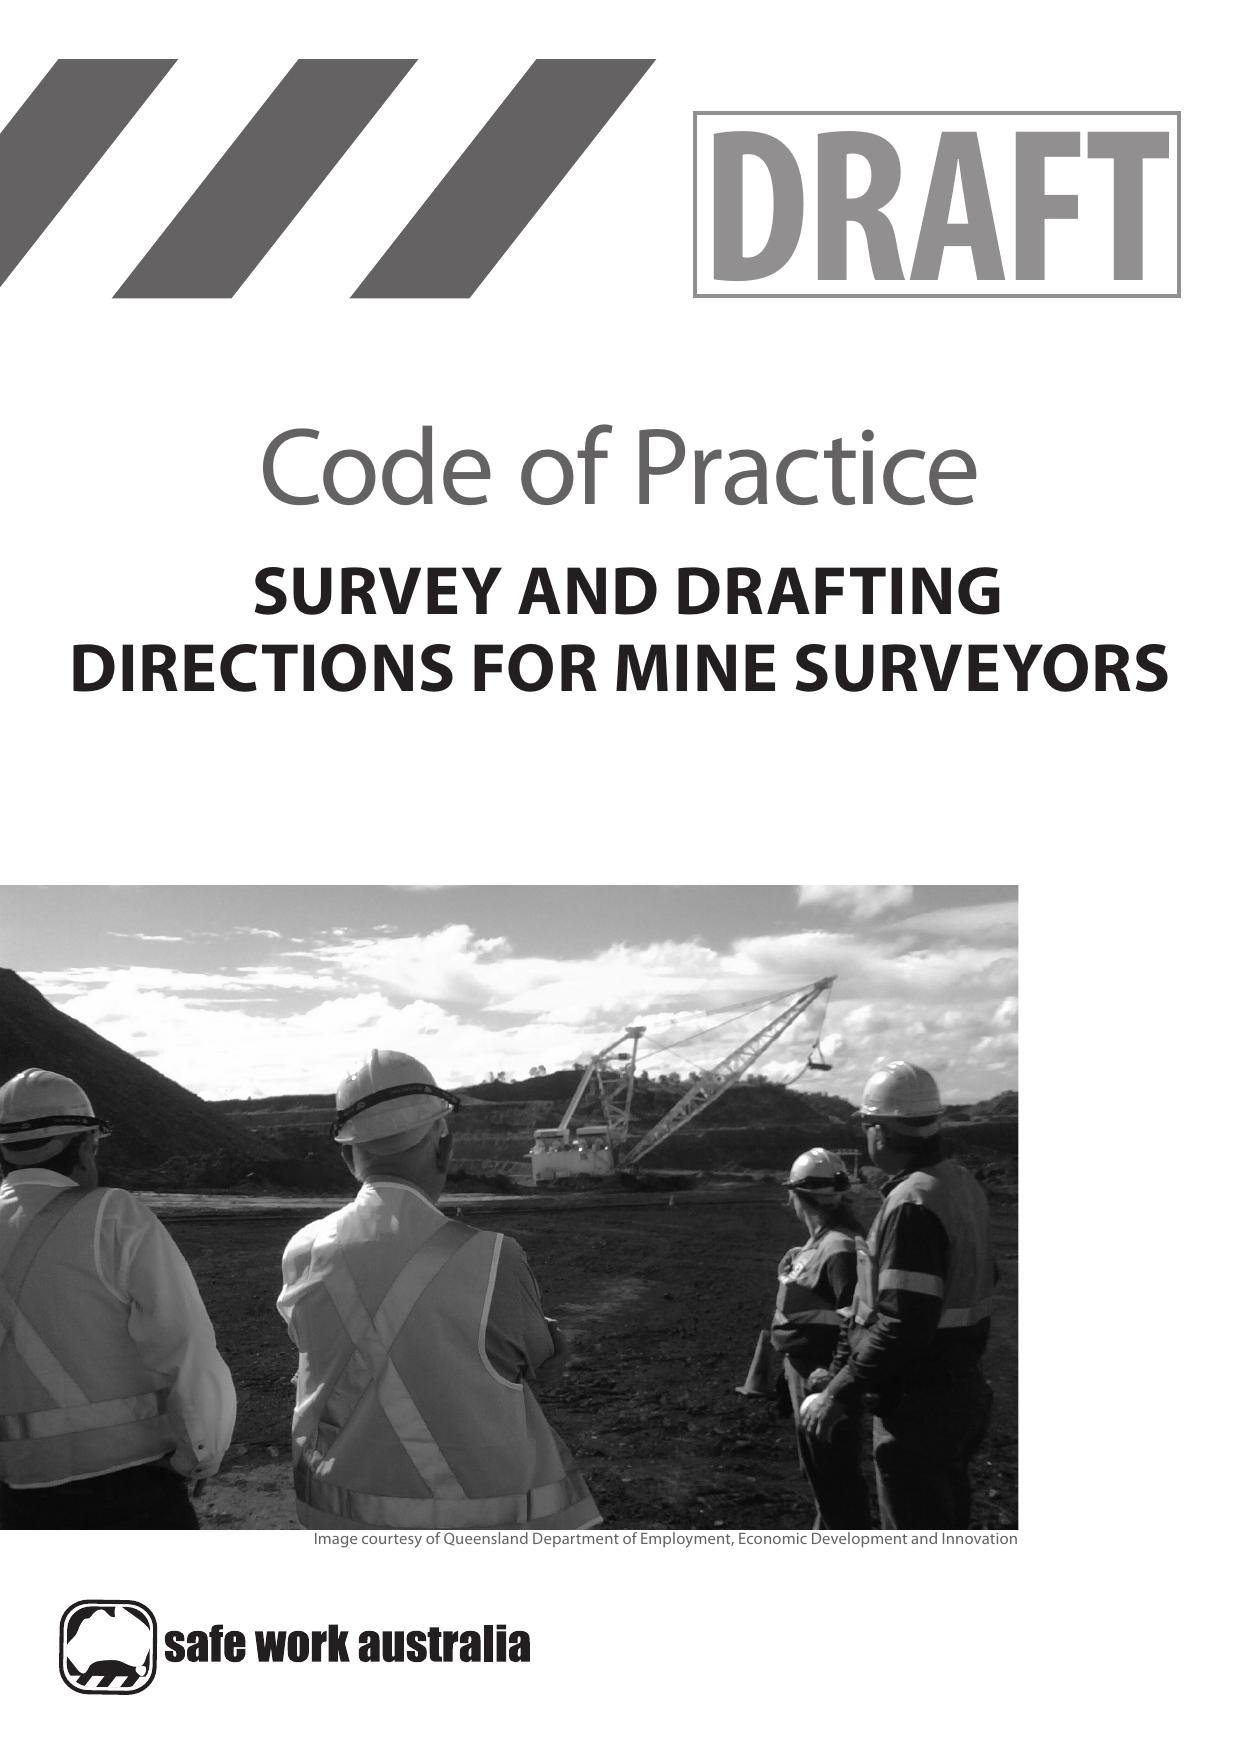 SURVEY AND DRAFTING DIRECTIONS FOR MINING SURVEYORS